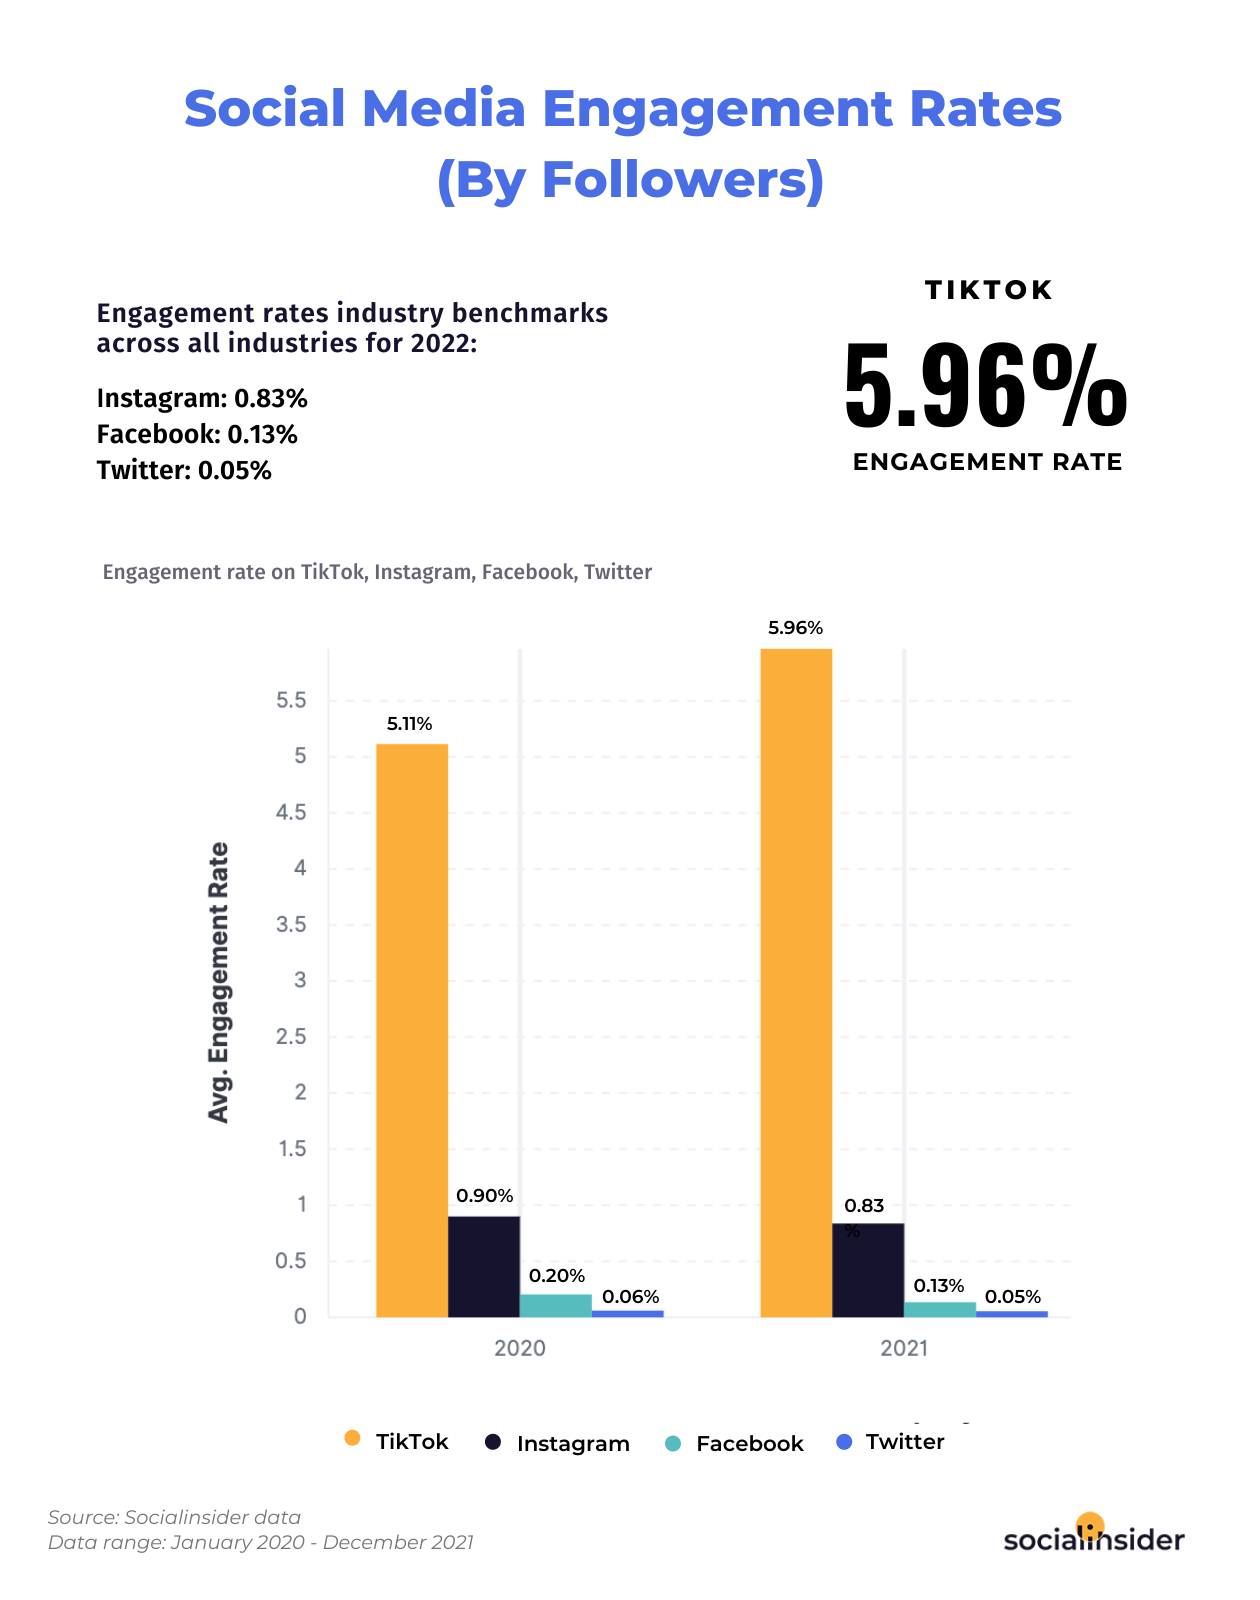 Here you can see social media engagement benchmarks for Facebook, Instagram, Twitter, and TikTok.